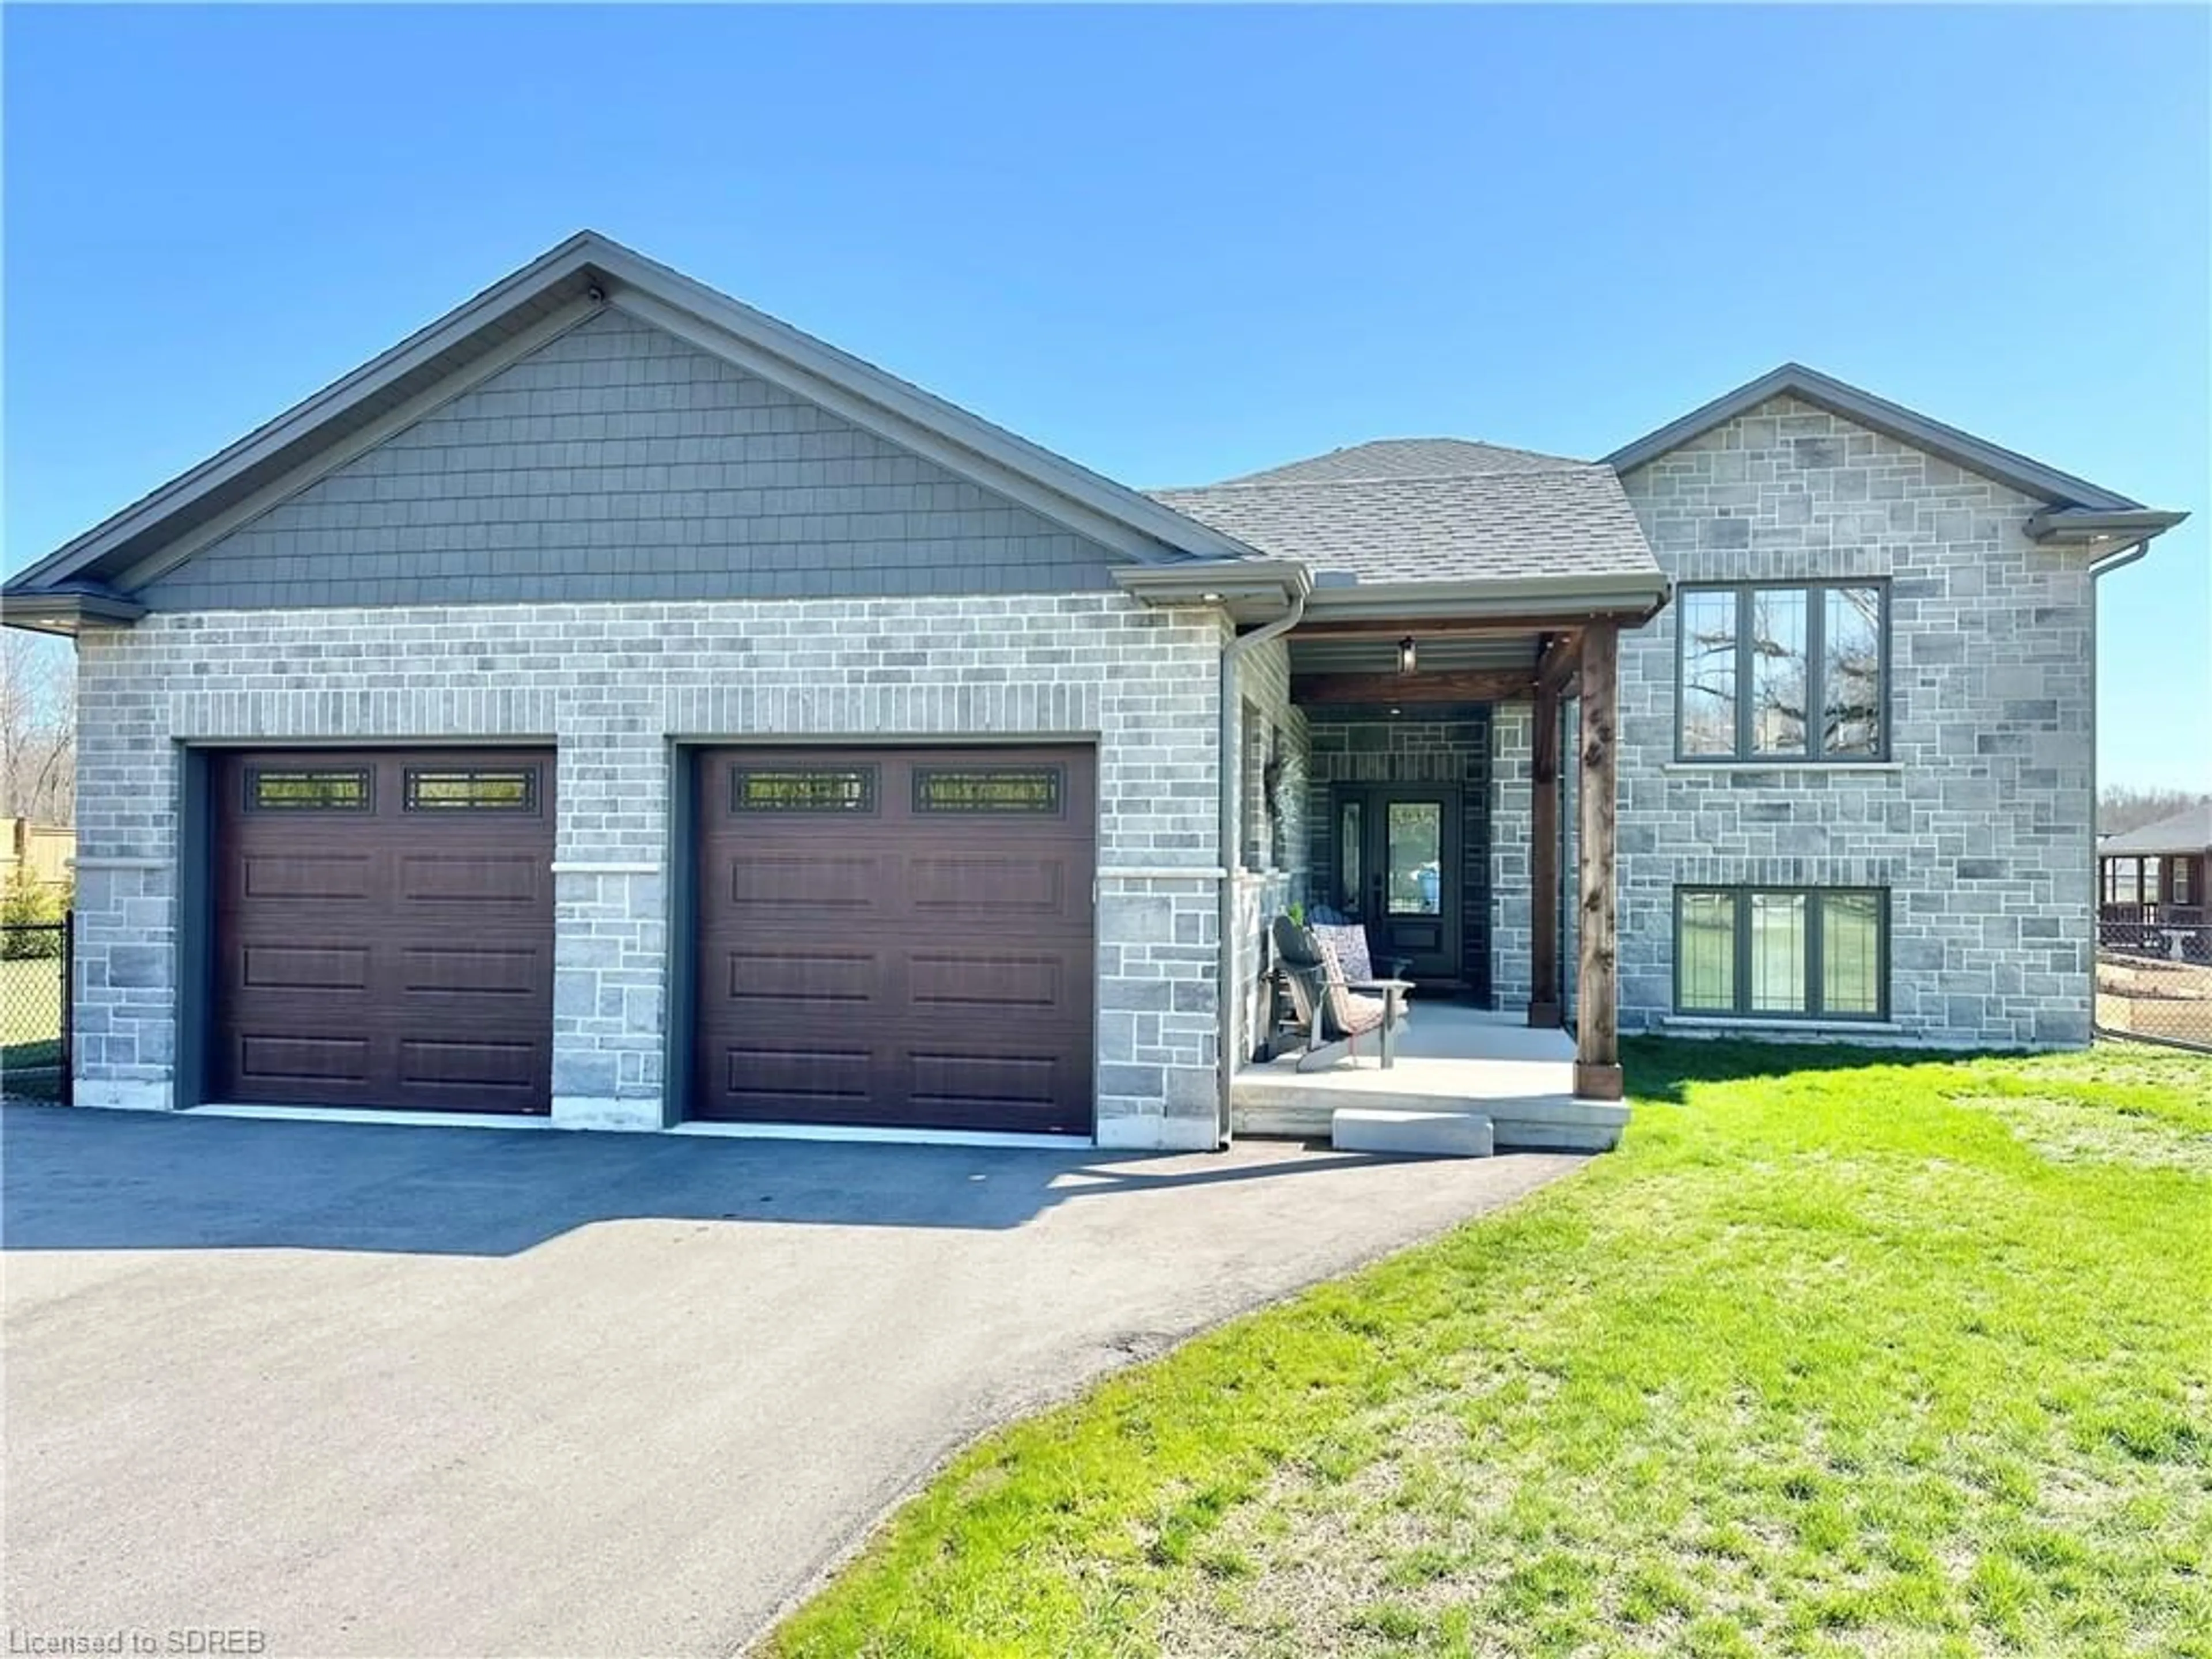 Home with brick exterior material for 1916 Turkey Point Rd, Greens Corners Ontario N3Y 4J9